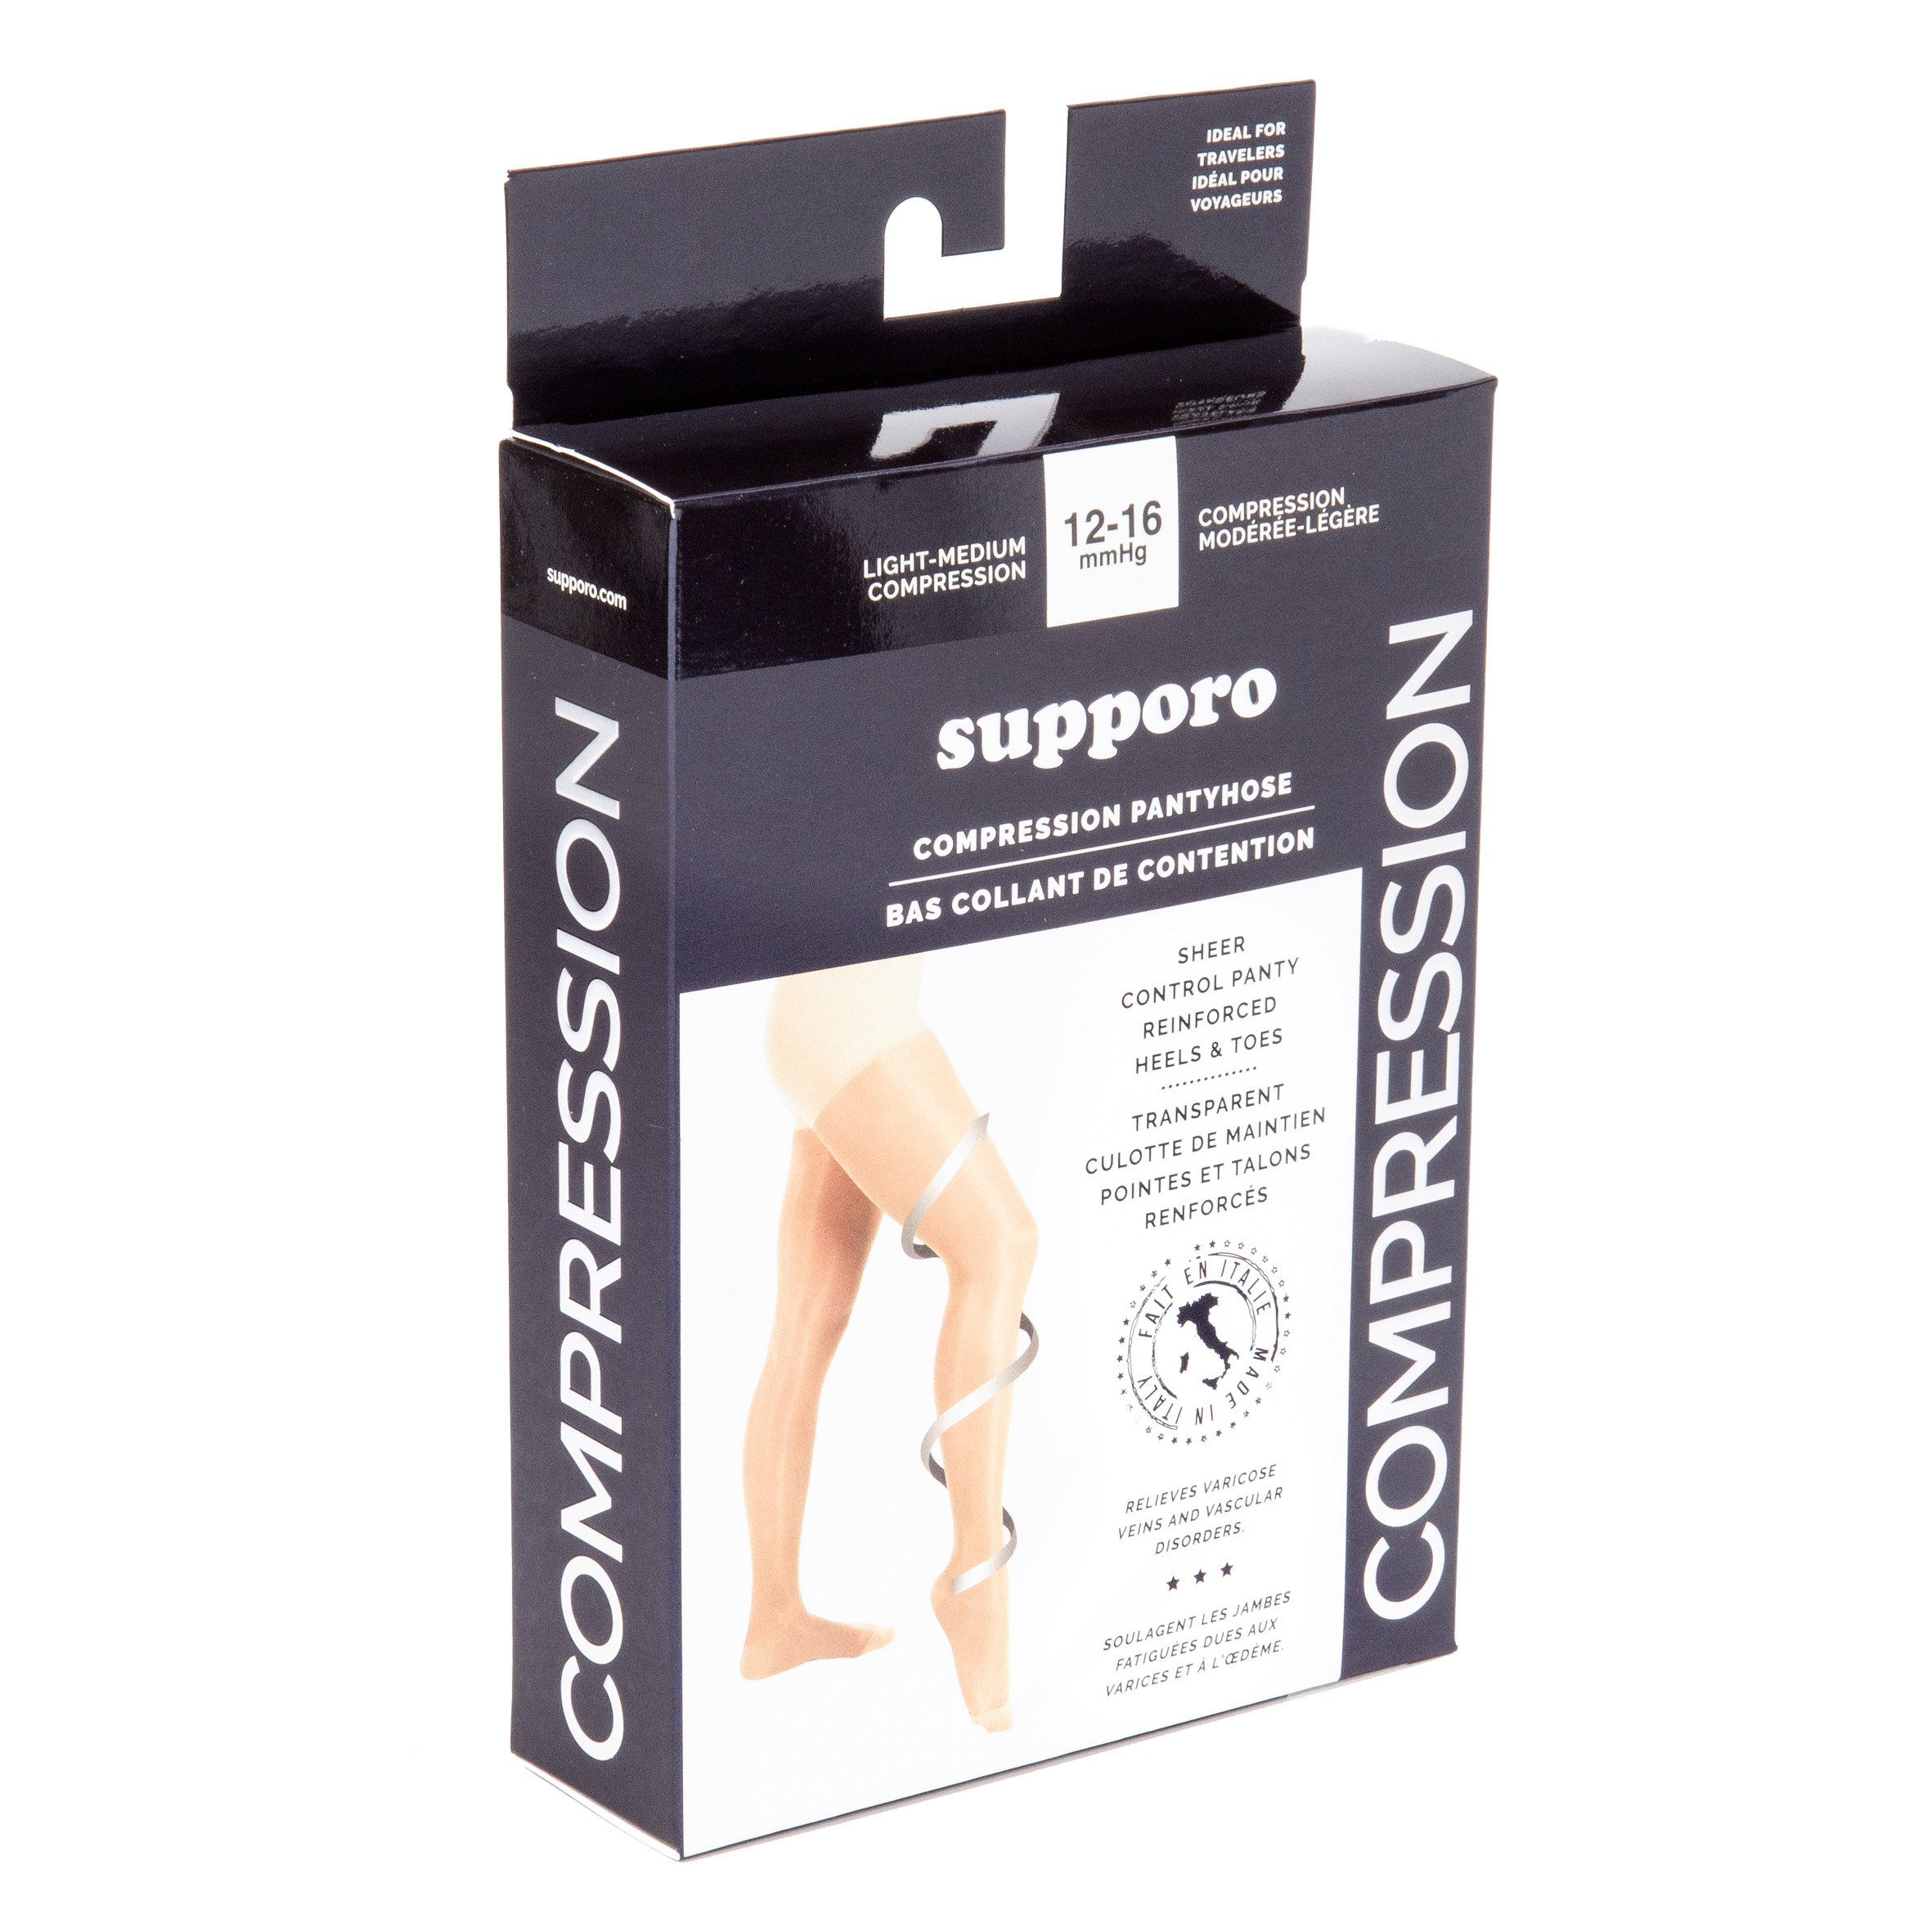 Supporo Sheer Compression Pantyhose, 12-16 mmHg